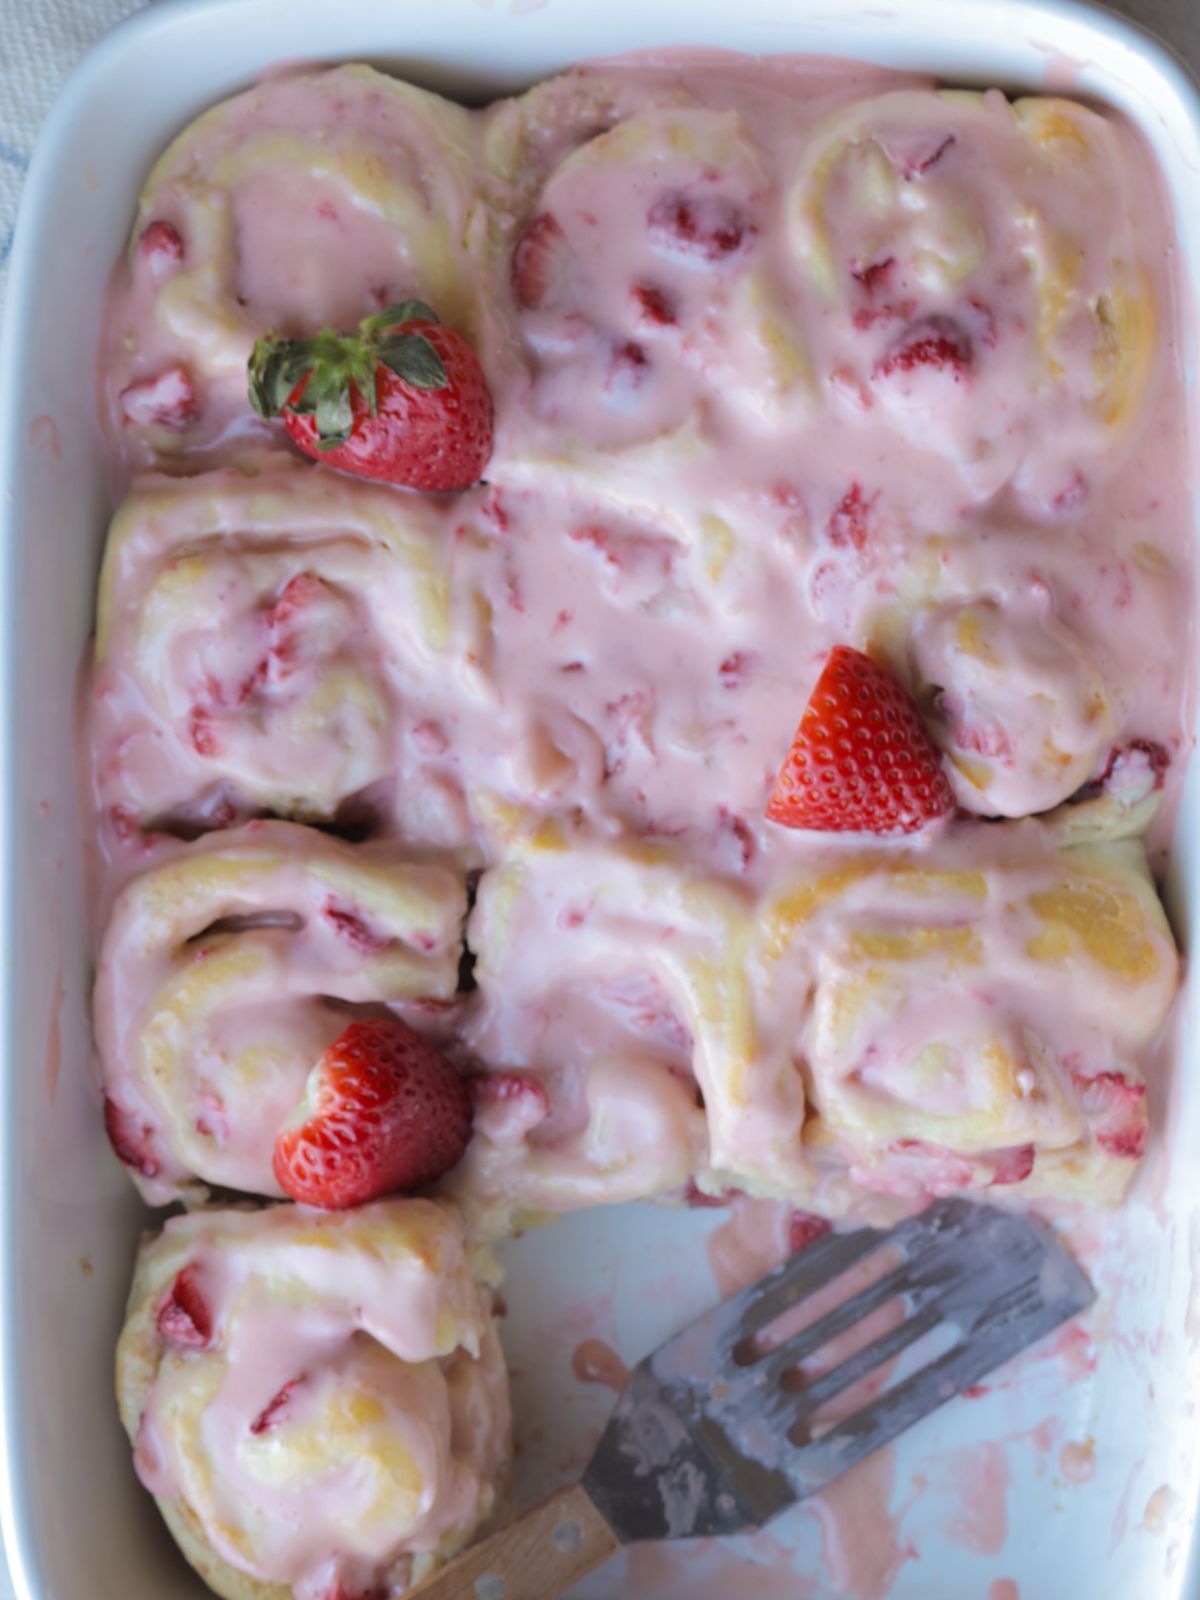 Strawberry cheesecake cinnamon rolls with strawberry icing and a few strawberries on top of them for decoration.